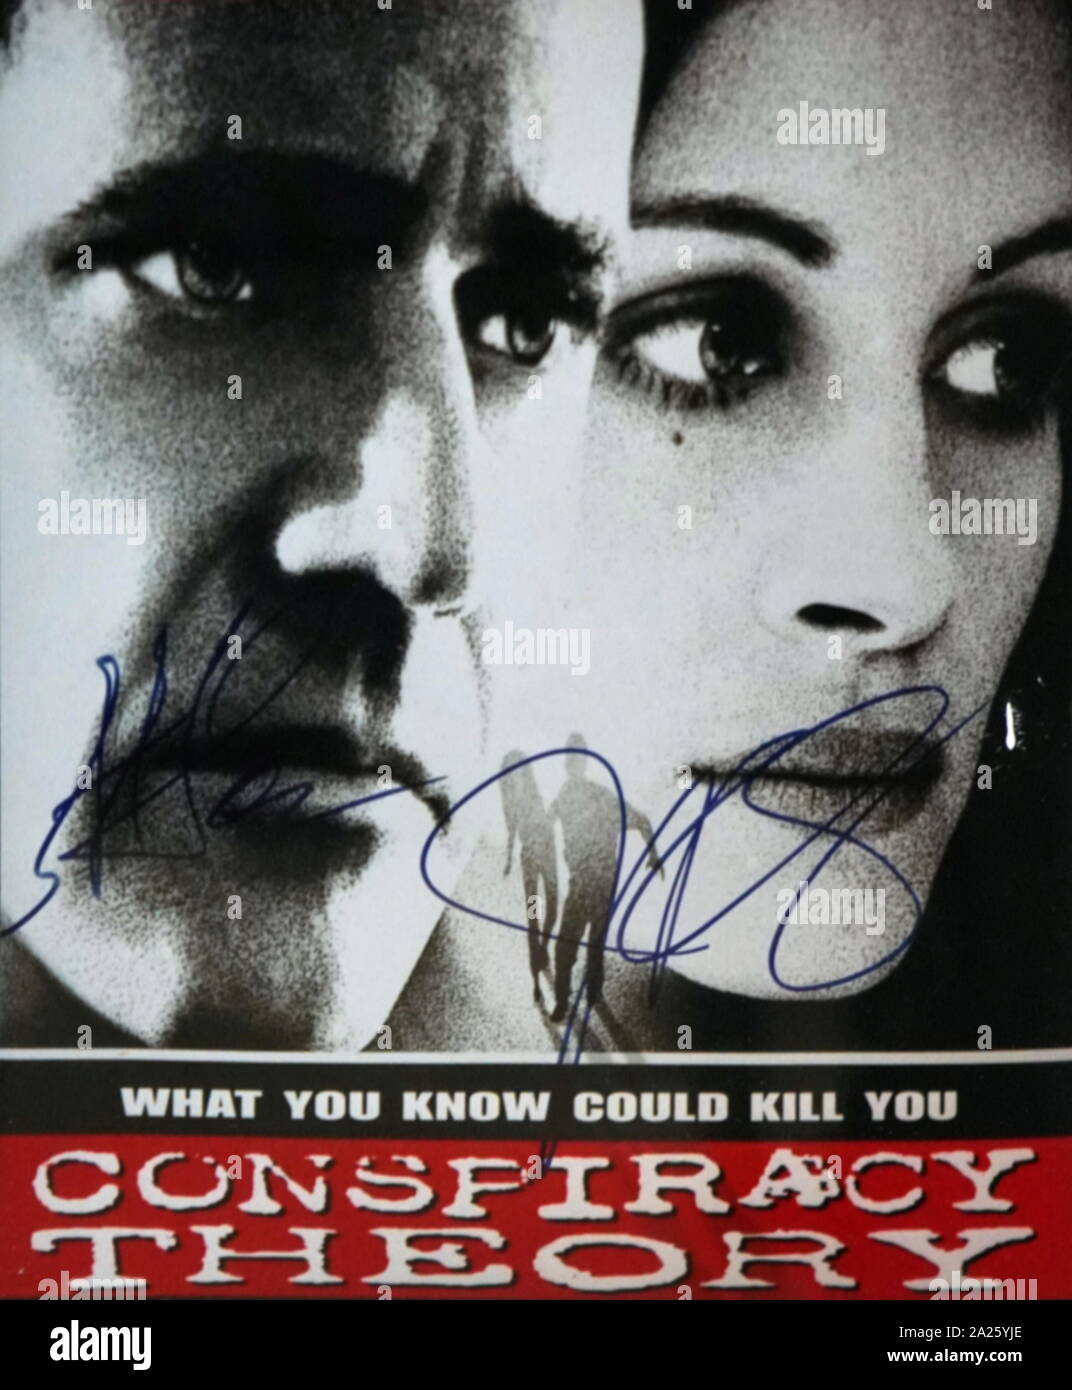 https://c8.alamy.com/comp/2A25YJE/poster-for-the-movie-conspiracy-theory-signed-by-julia-roberts-and-mel-gibson-2A25YJE.jpg